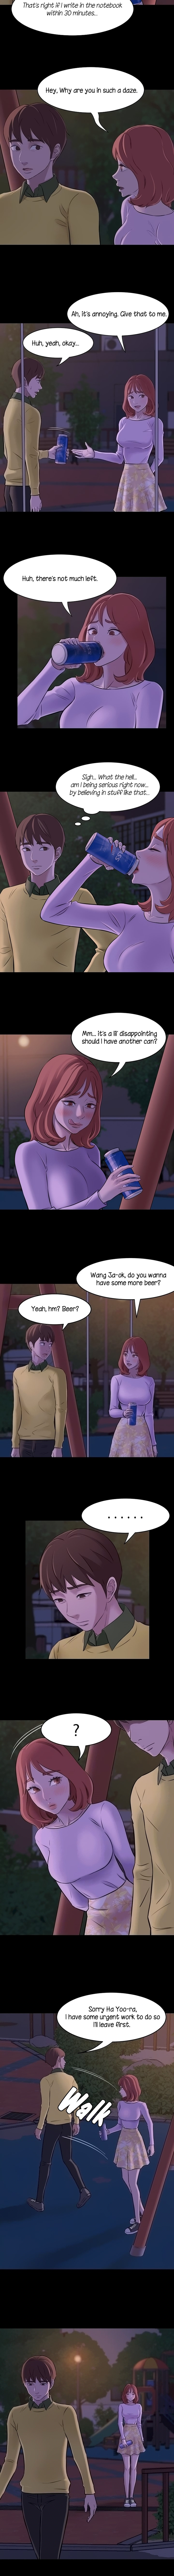 Panty Note - Chapter 2 Page 2